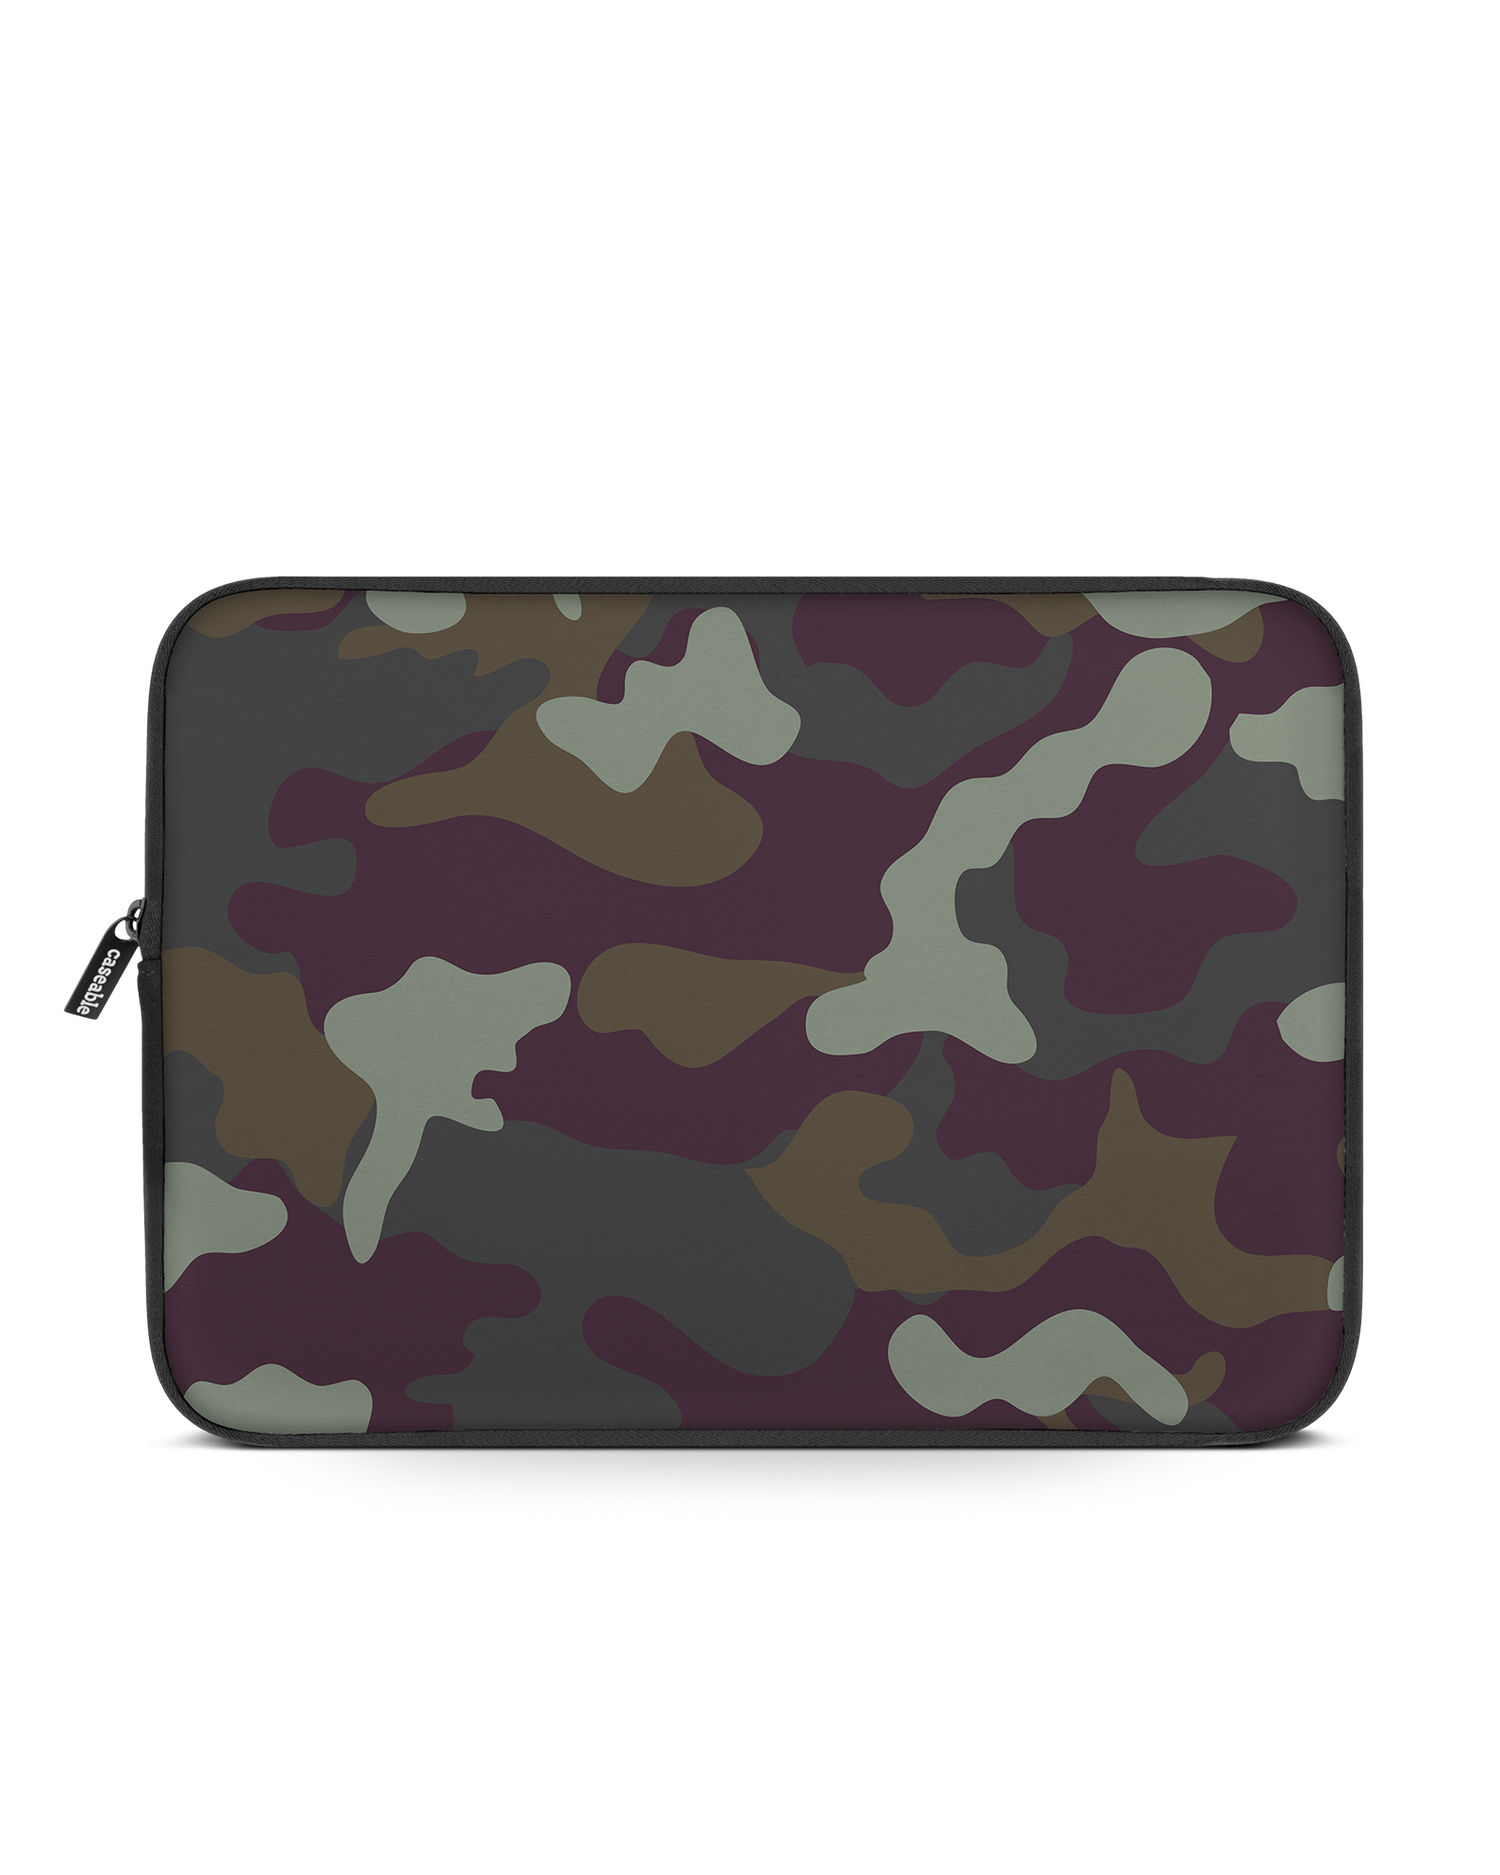 Night Camo Laptop Case 16 inch: Front View